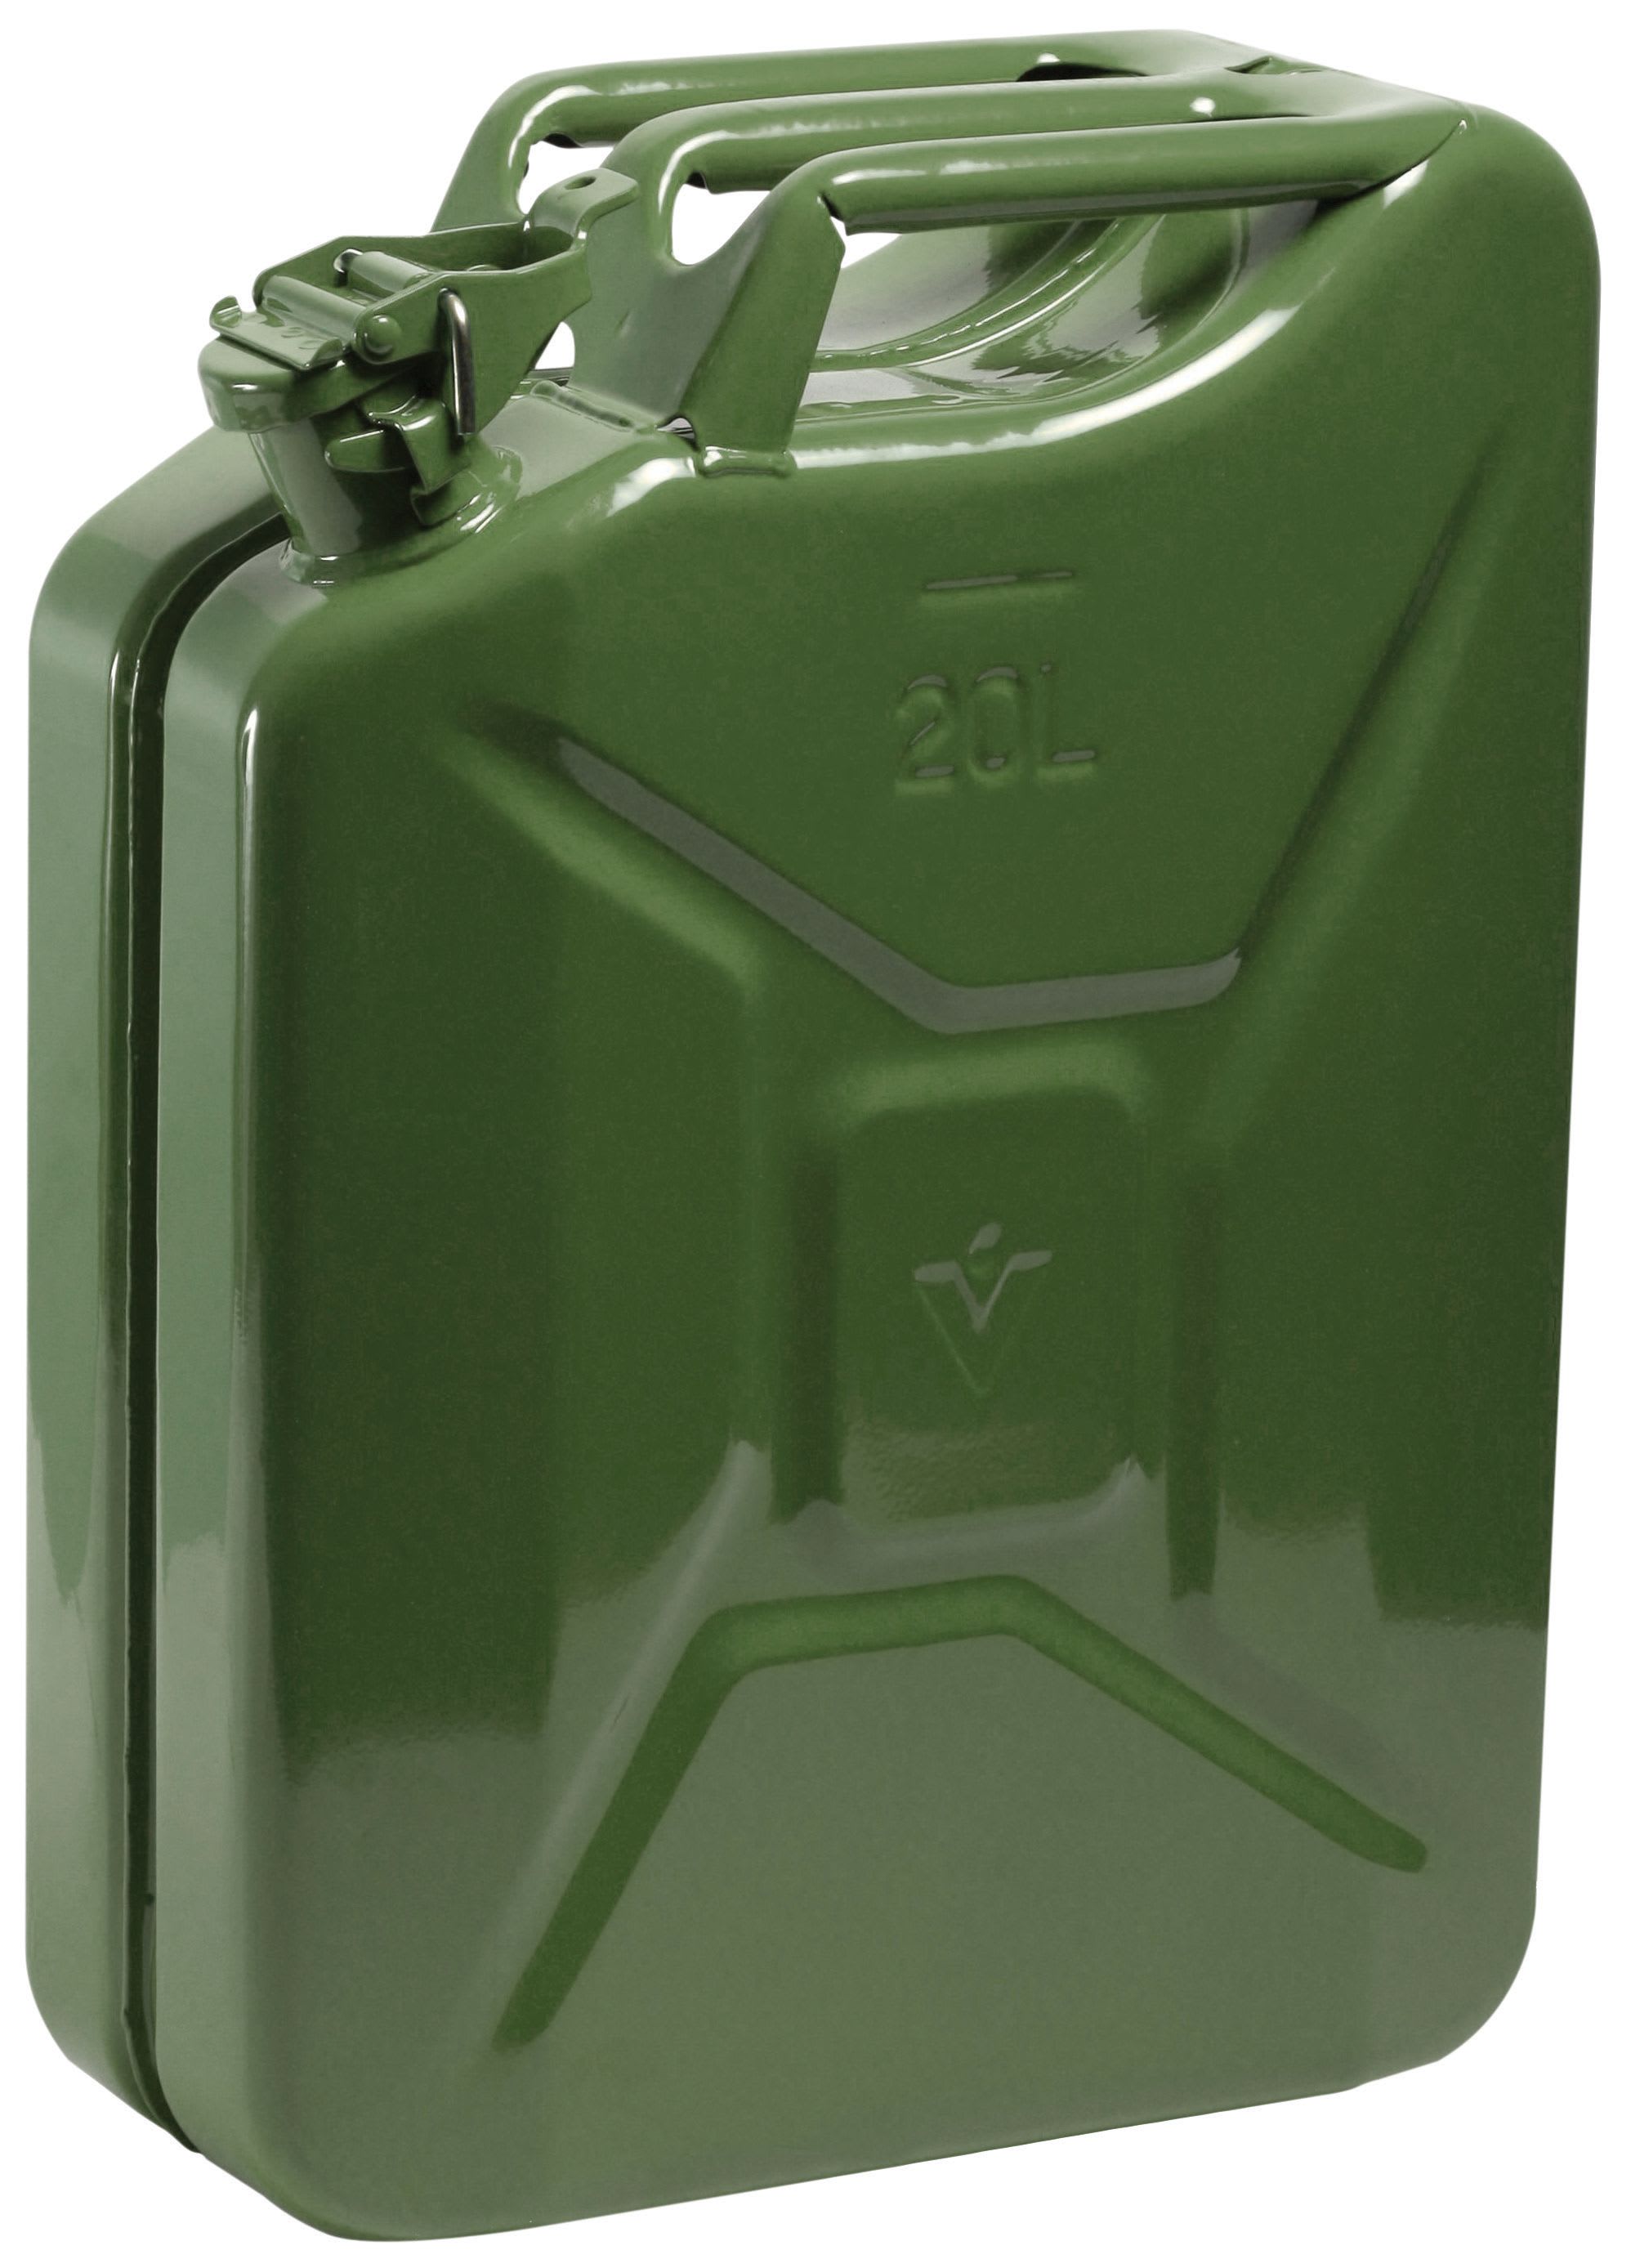 The Handy 20L Steel Jerry Can